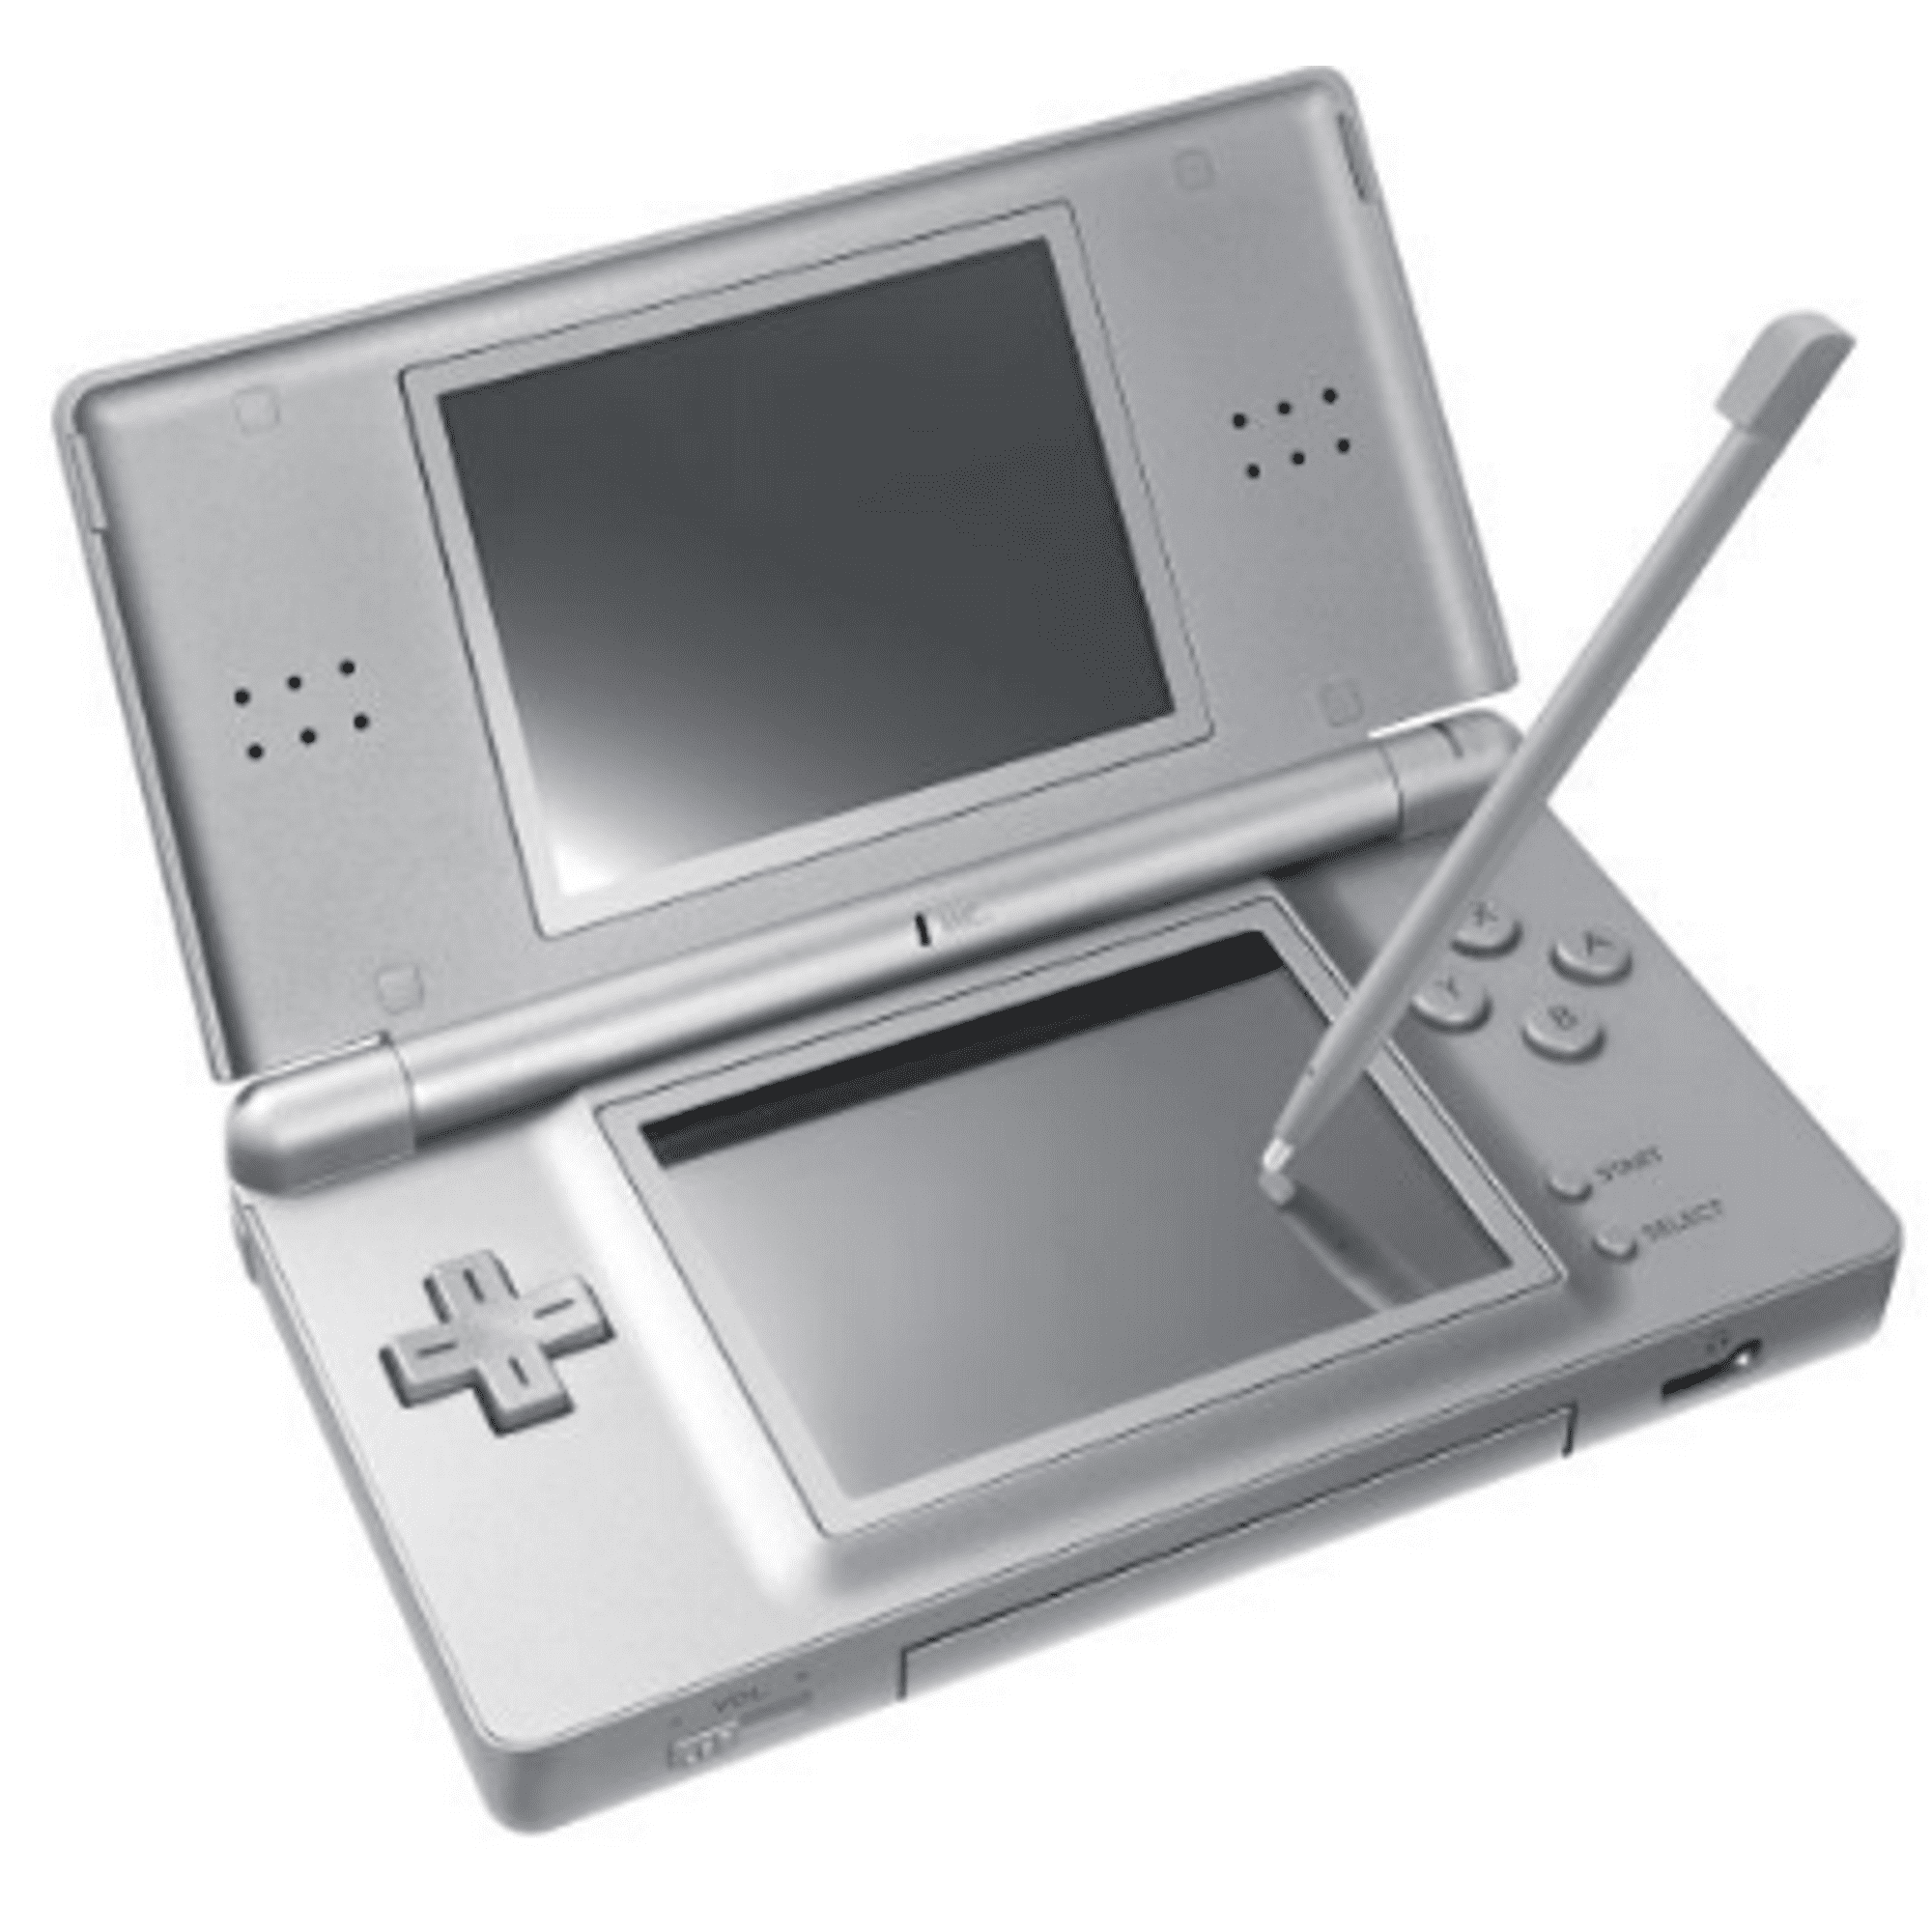 Outlook Withdrawal scam Authentic Nintendo DS Lite Metallic Silver Gray with Stylus and Charger -  100% OEM | Walmart Canada